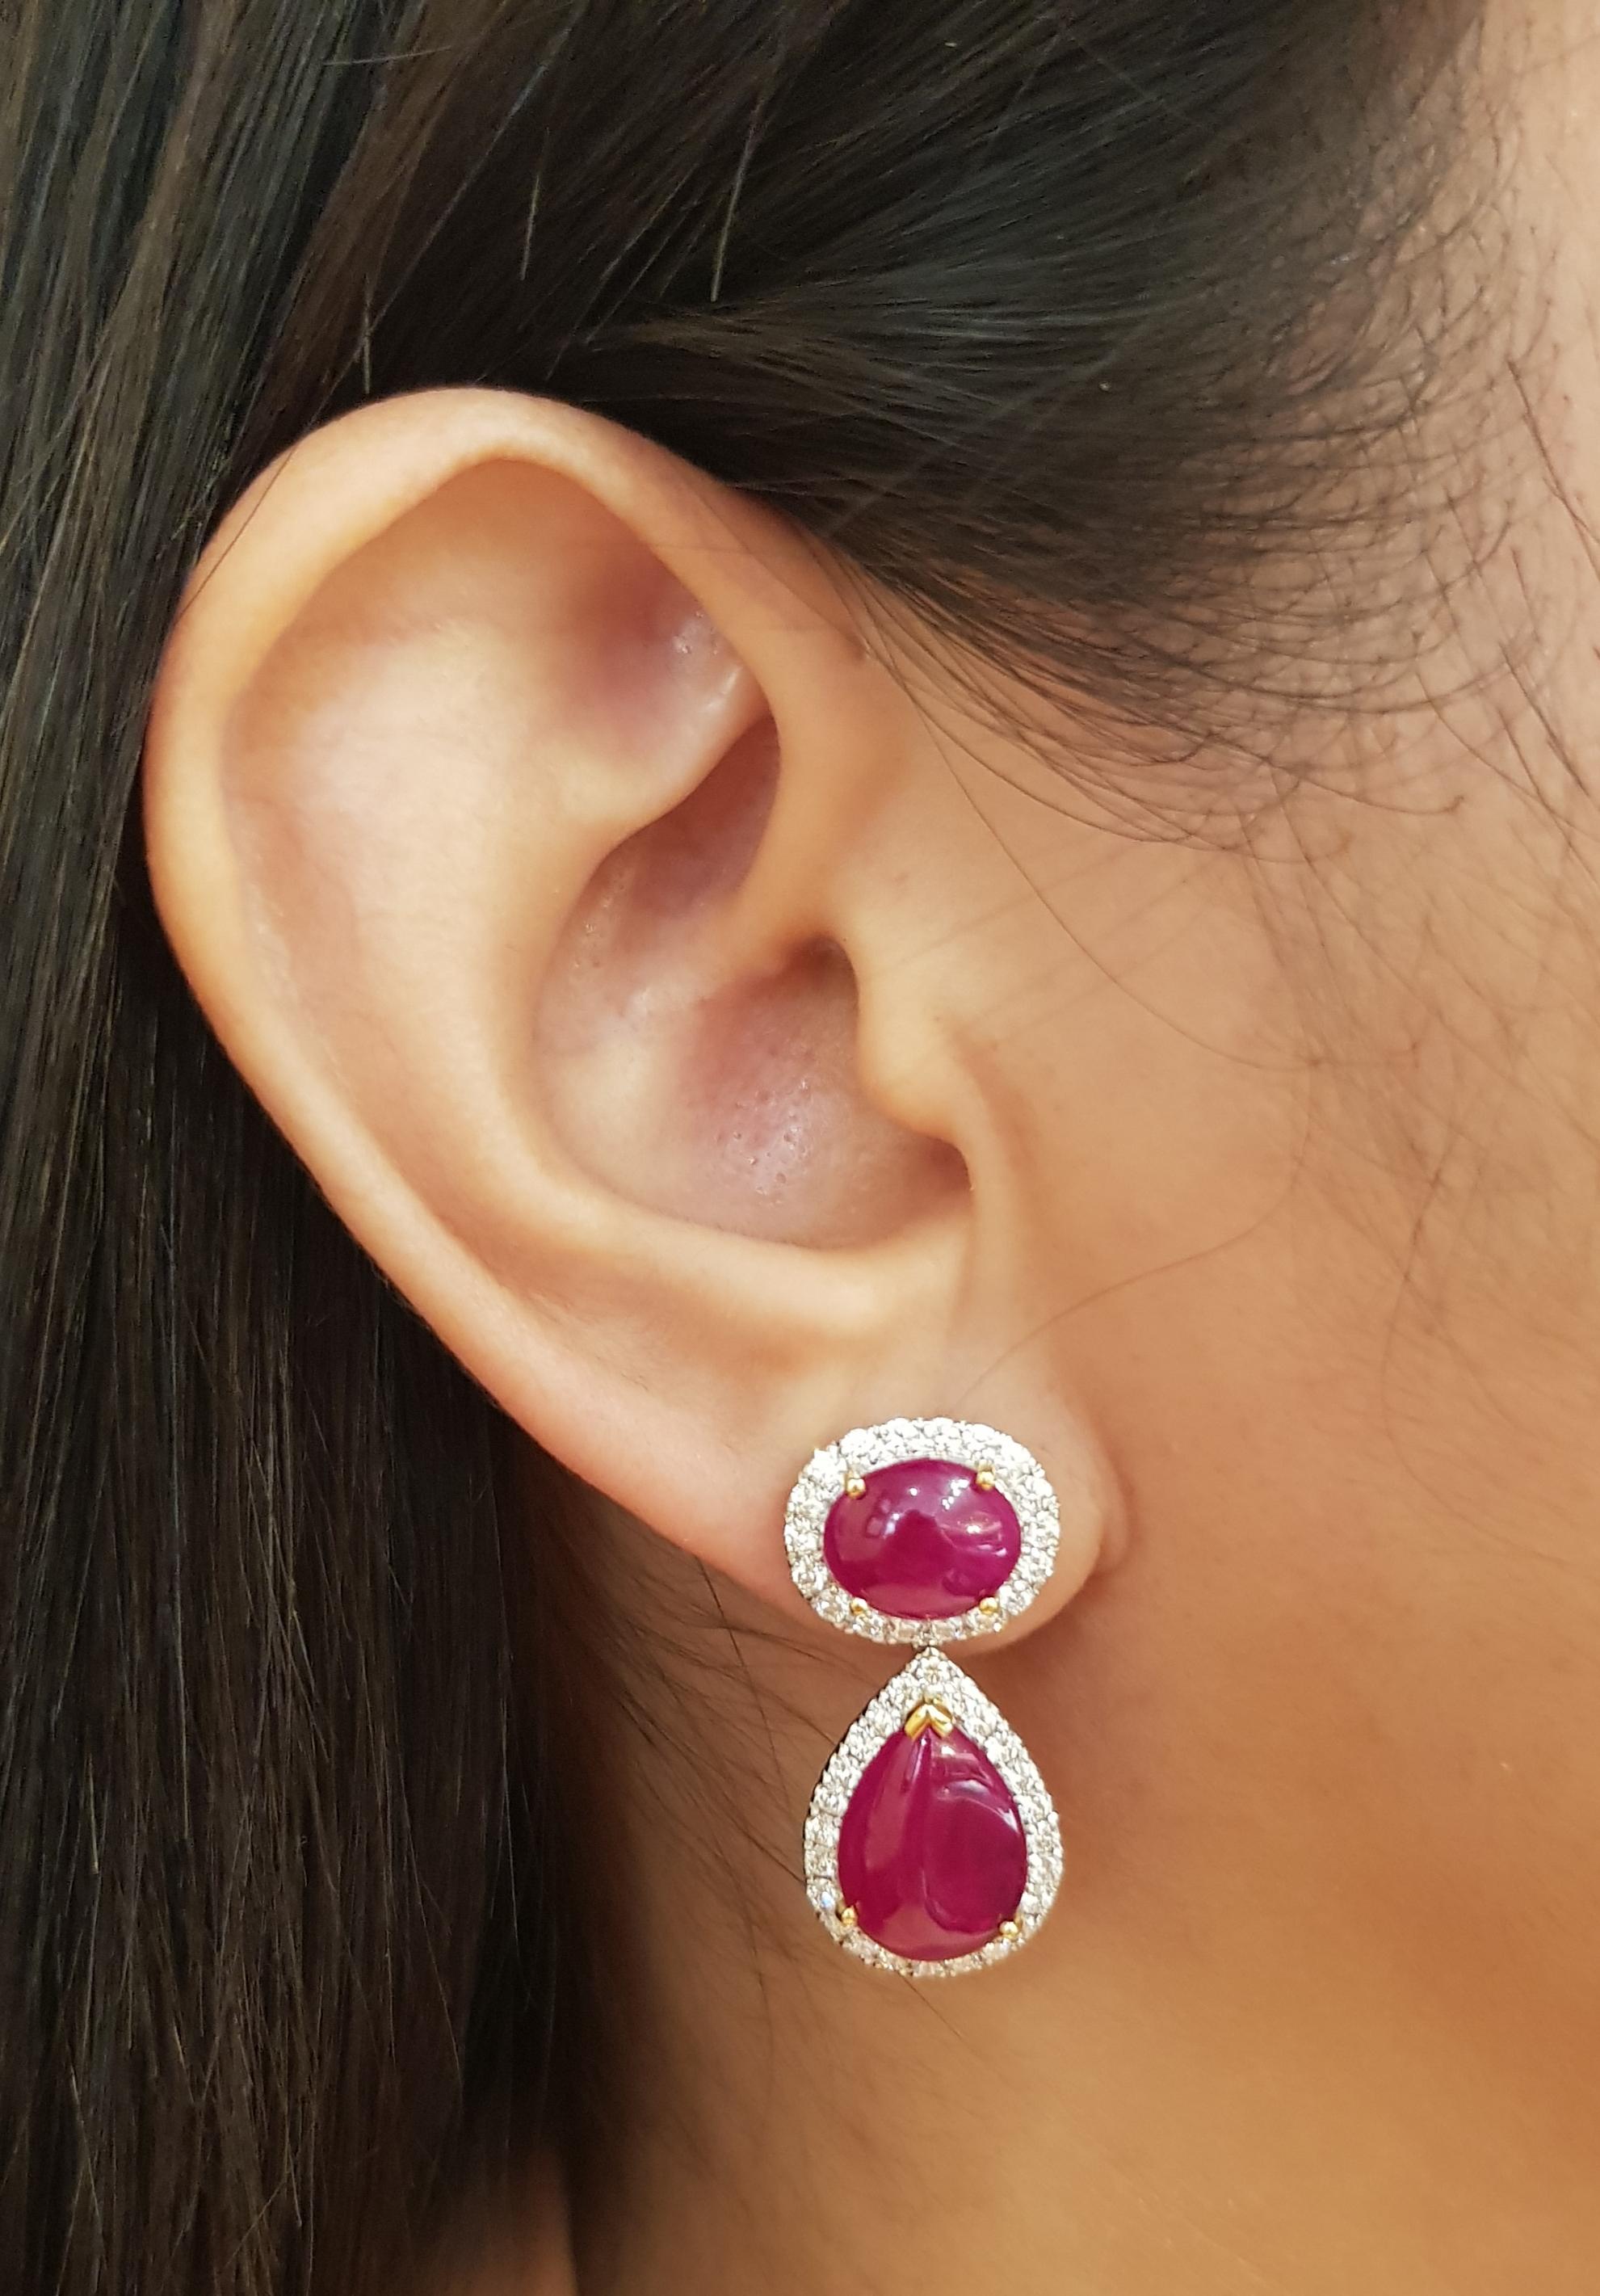 Cabochon Ruby 9.62 carats with Diamond 1.44 carats Earrings set in 18K White Gold Settings

Width: 1.3 cm 
Length: 2.8 cm
Total Weight: 11.37 grams

